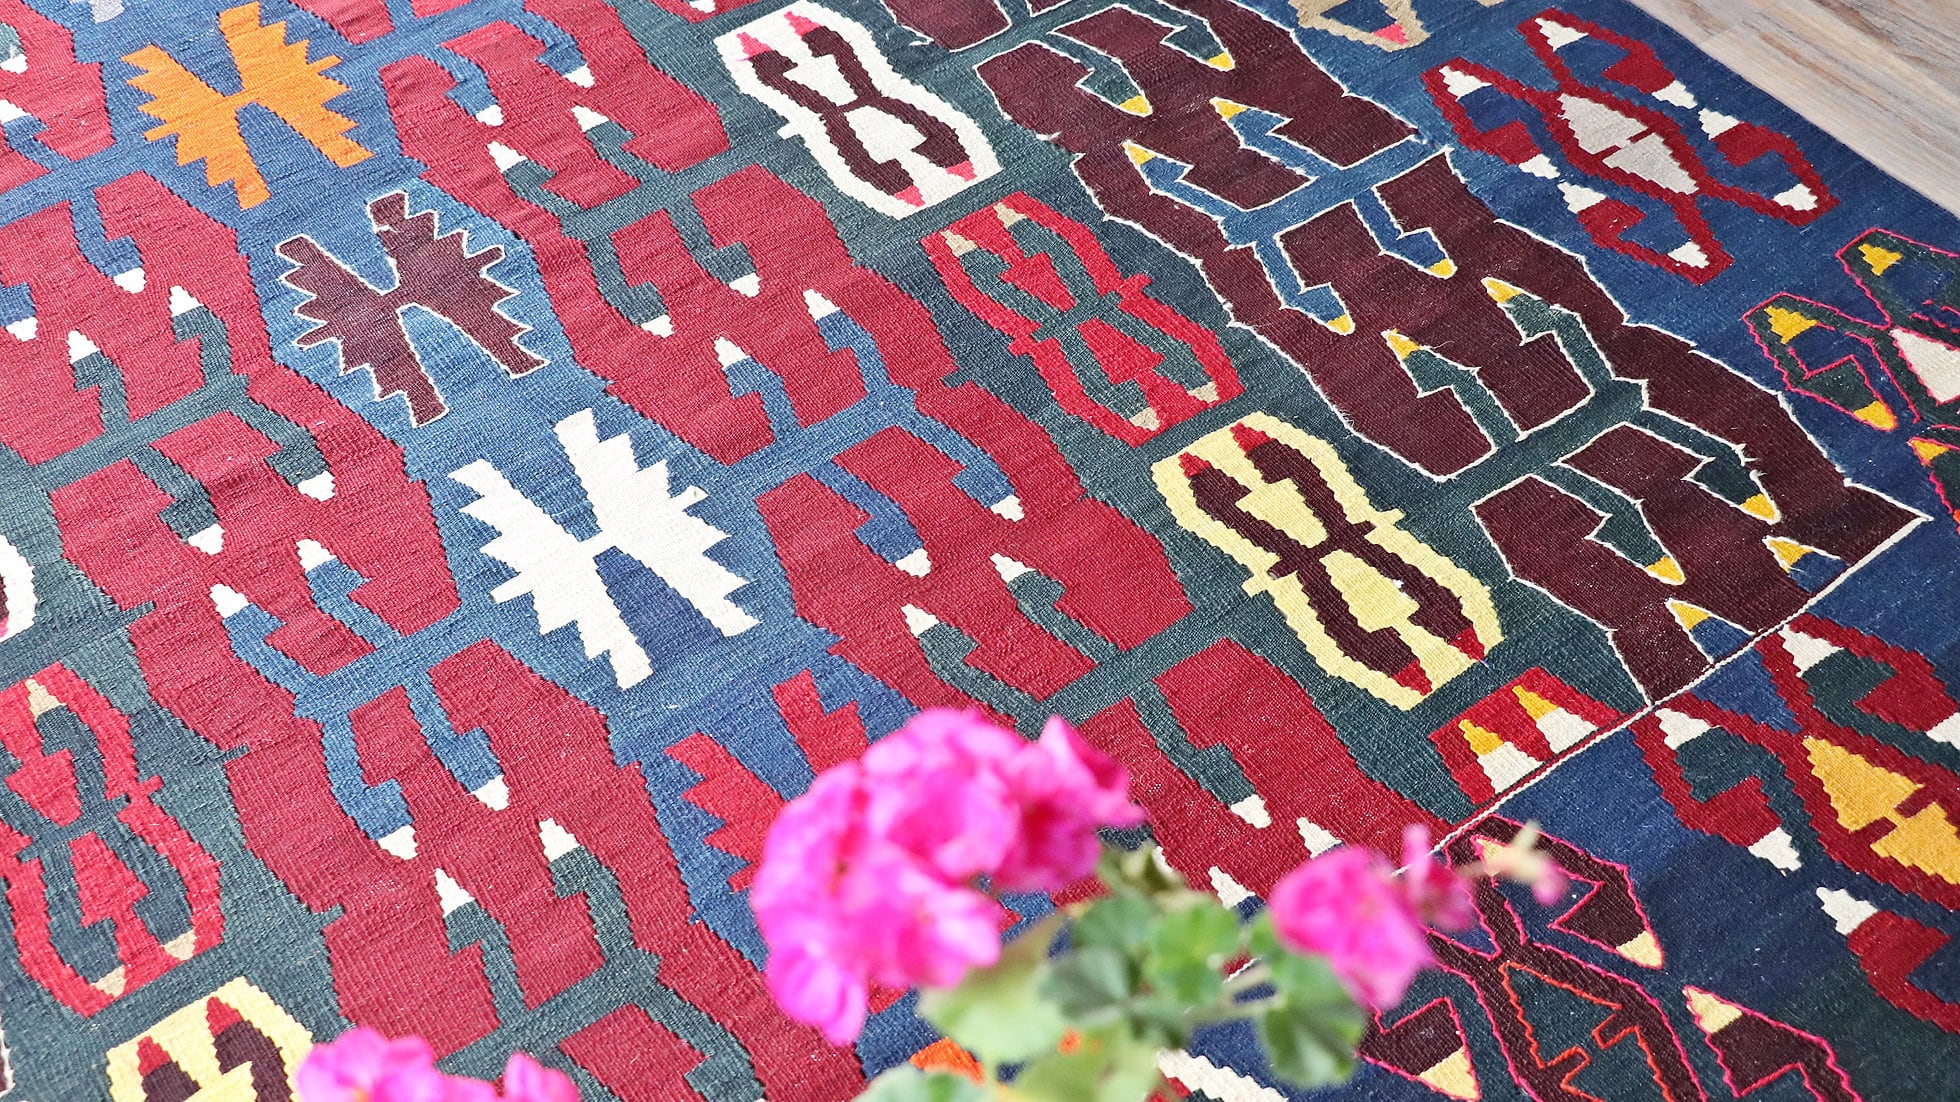 Bohemian vintage large area rug in the patio